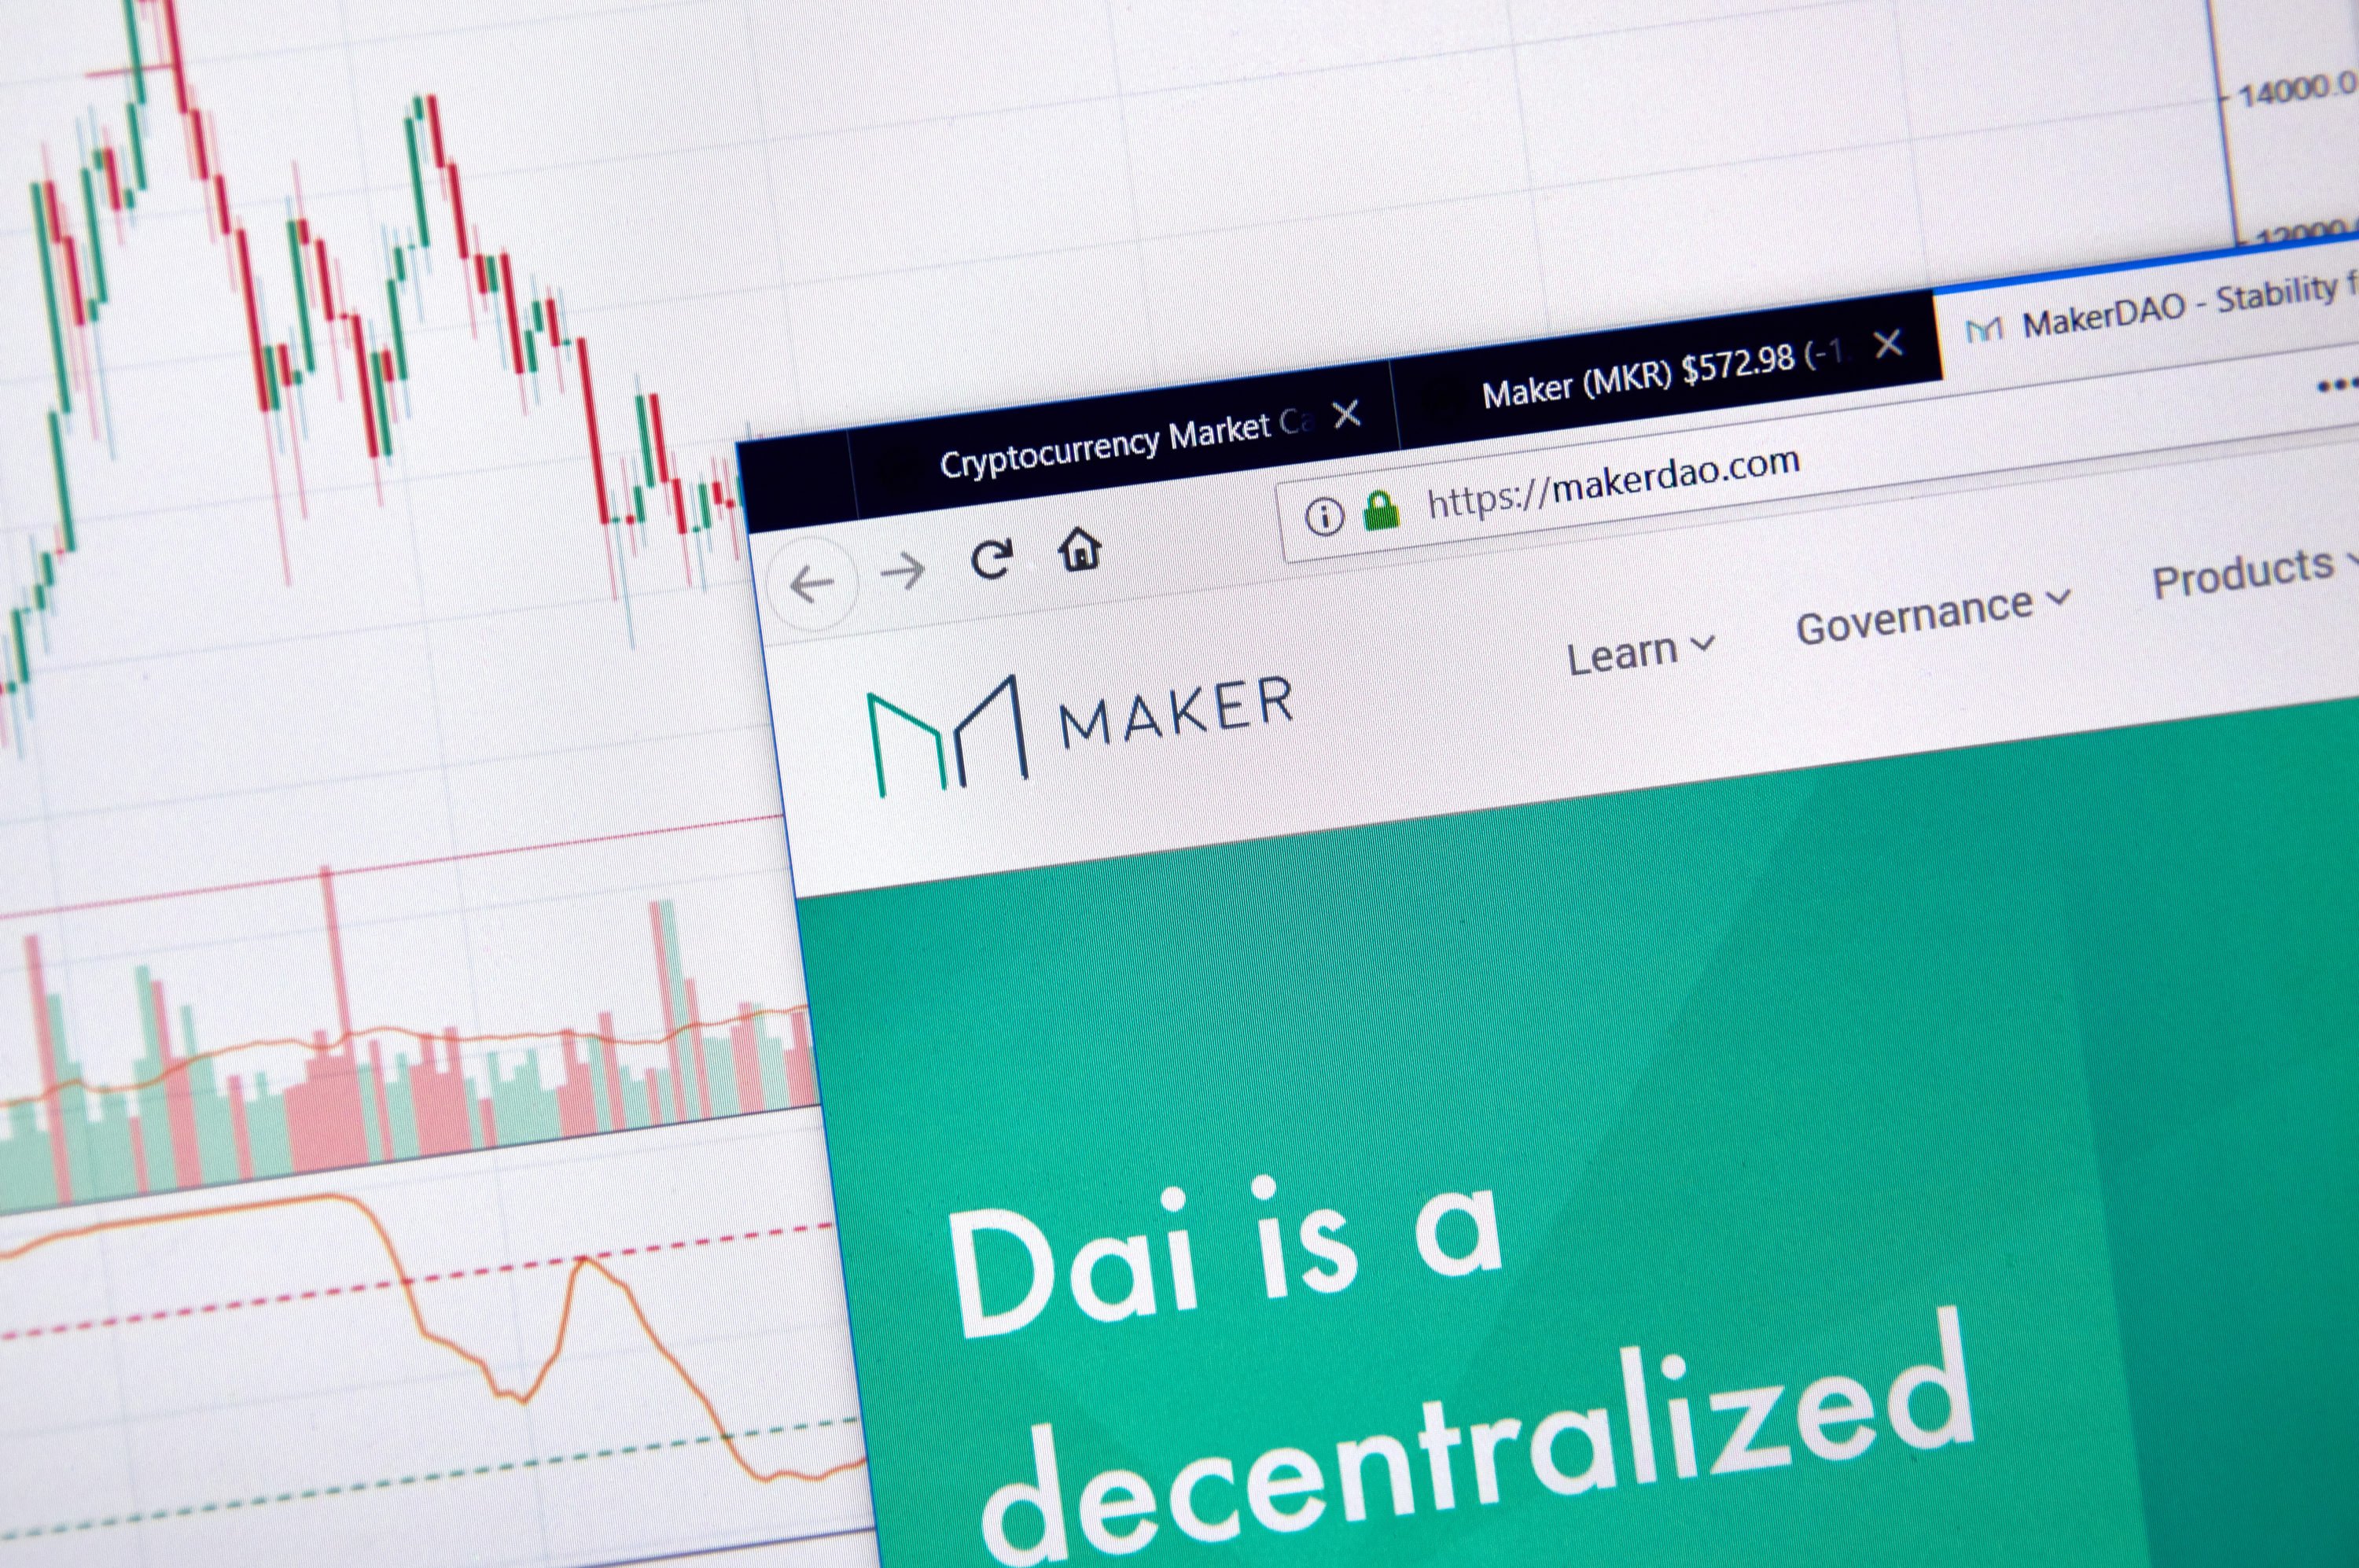 What Crypto Winter? Ethereum Based MakerDAO Posts Staggering Growth